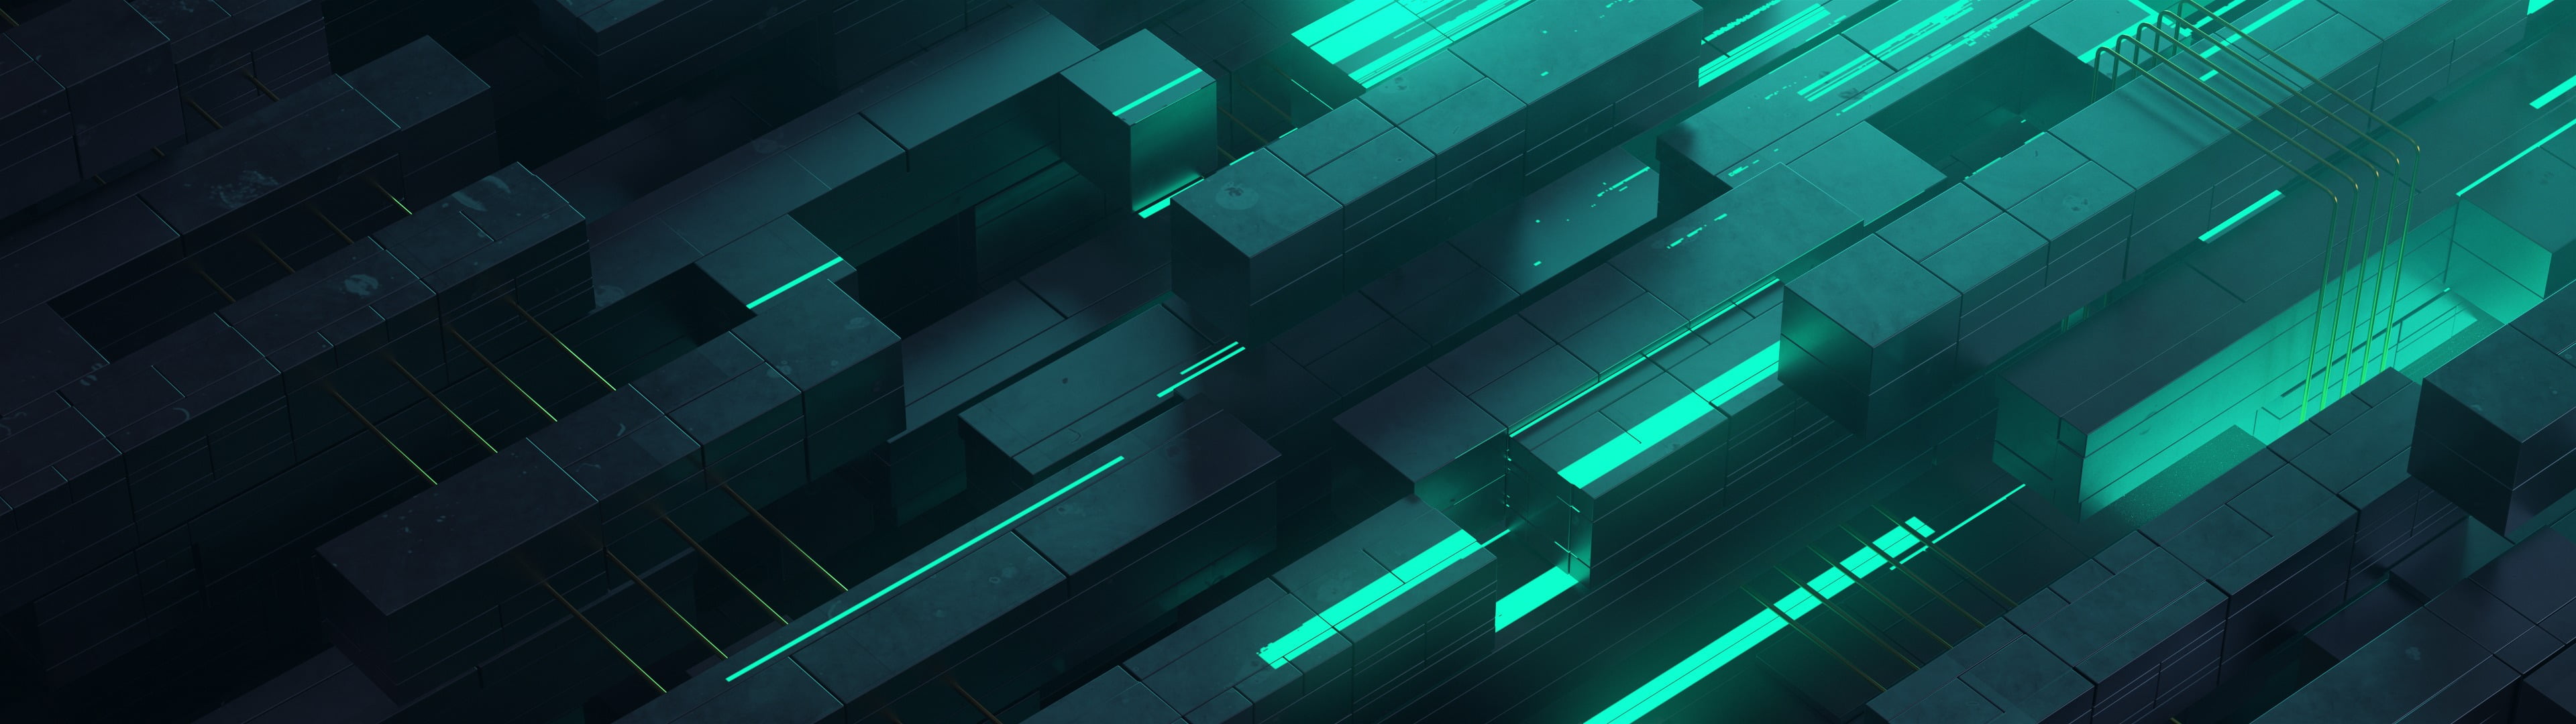 3D, 3D Abstract, neon glow, teal, technology, architecture